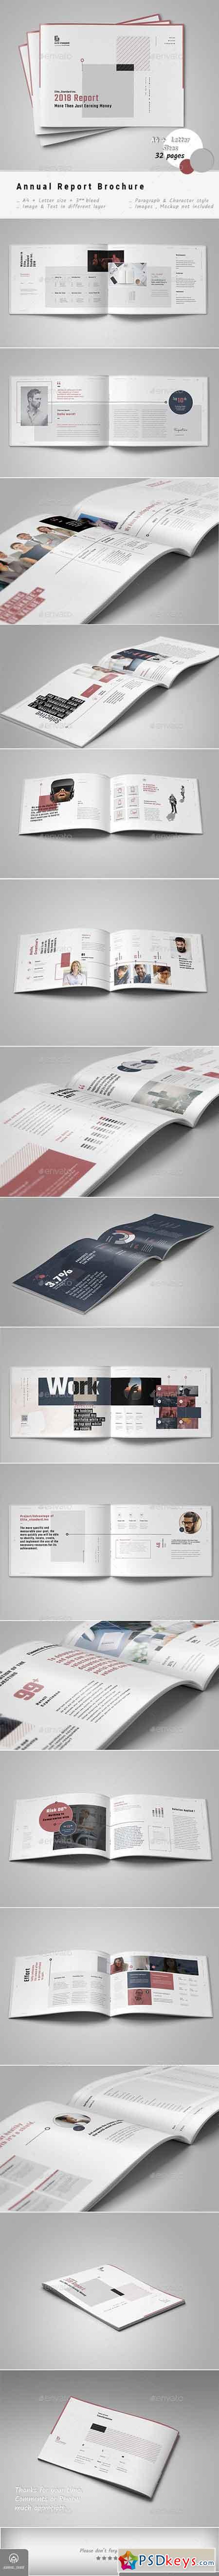 Download Annual Report 20609123 Free Download Photoshop Vector Stock Image Via Torrent Zippyshare From Psdkeys Com